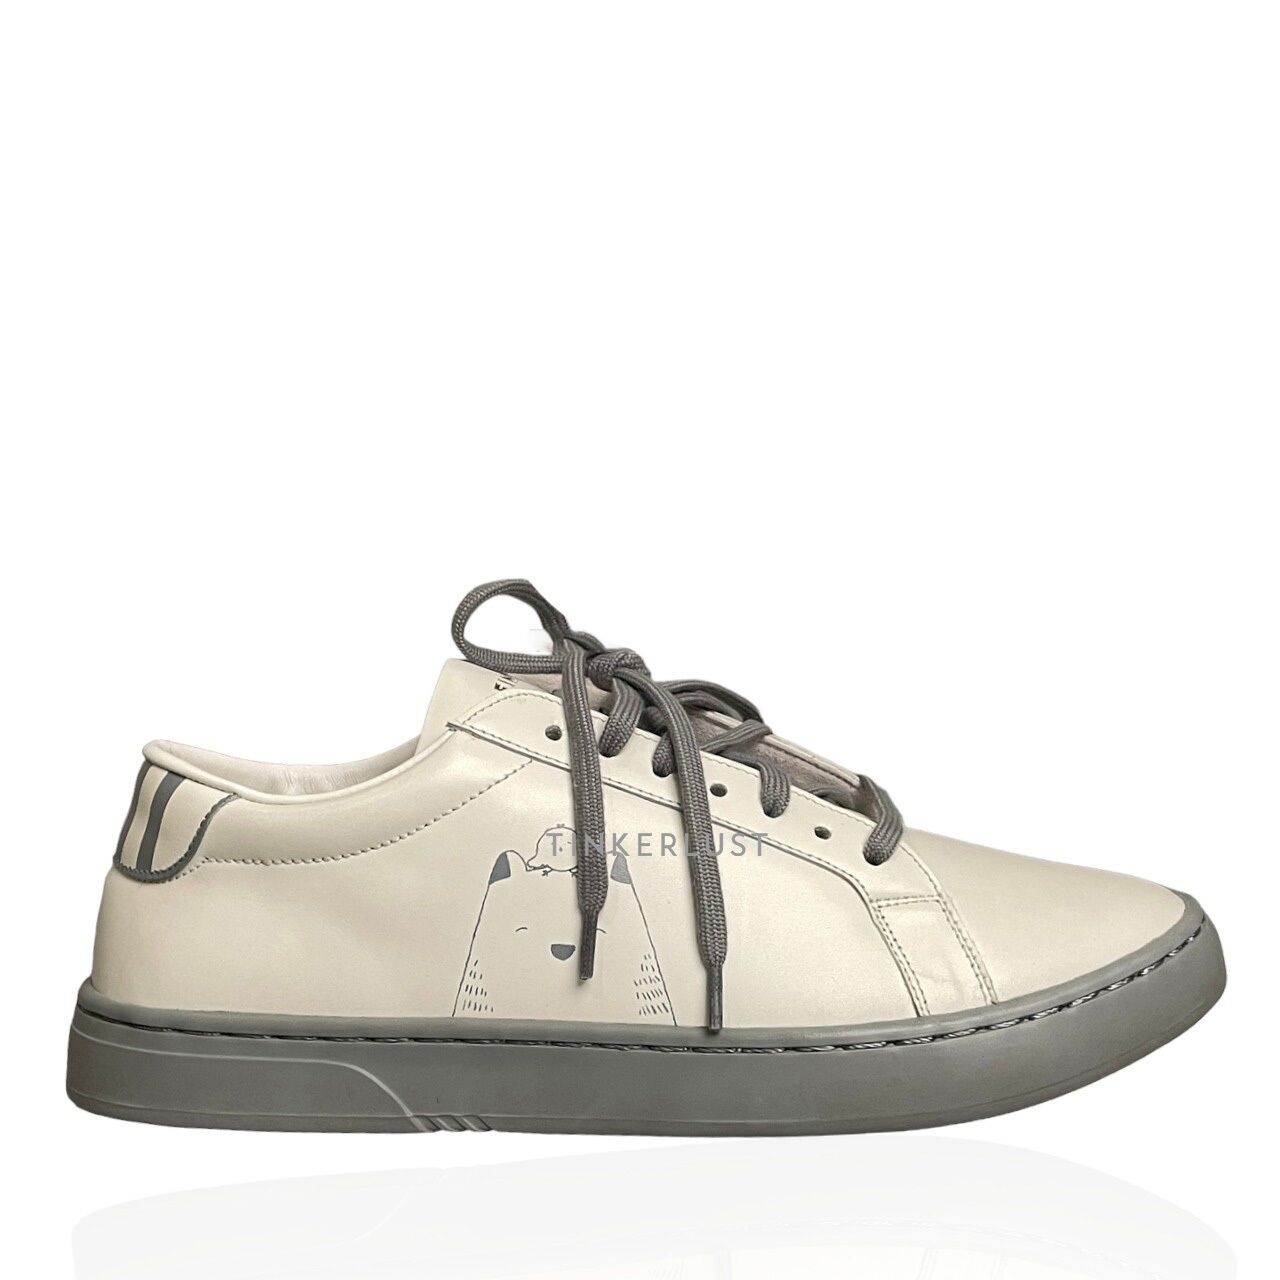 Fine Counsel x Big Bear and Bird Walk With Gratitude Grey & Off White Sneakers